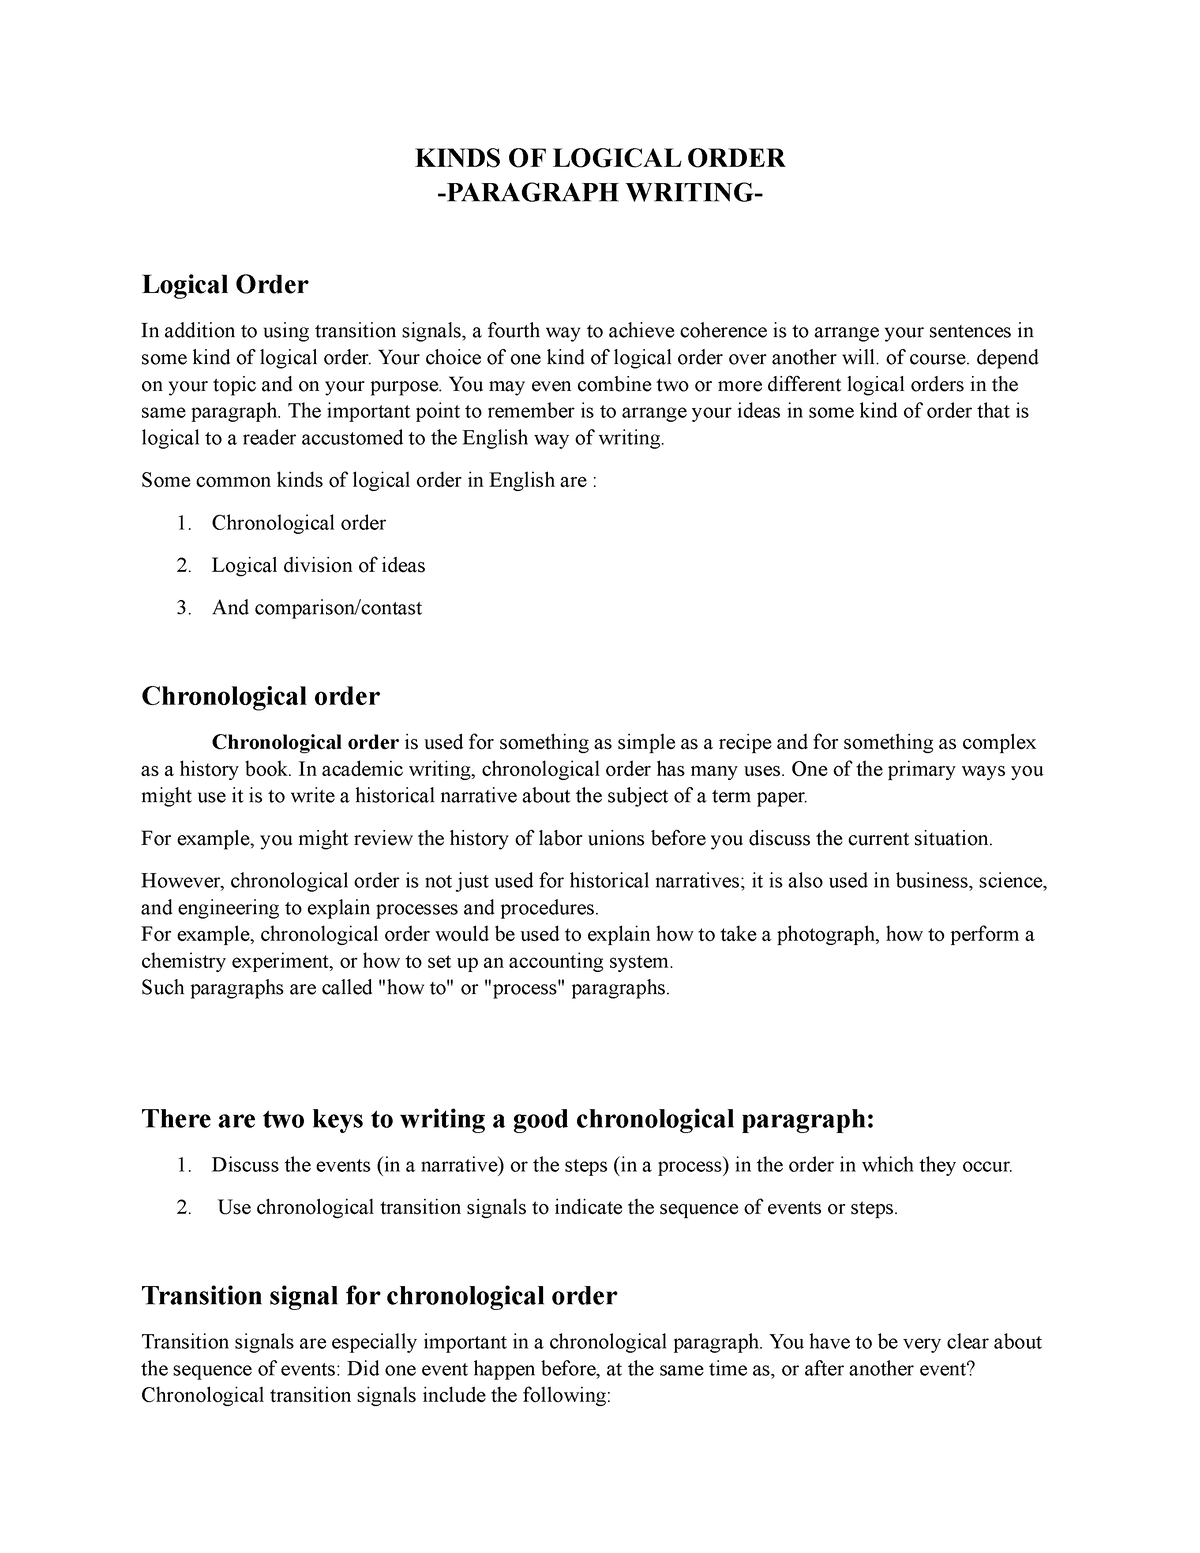 logical order essay examples